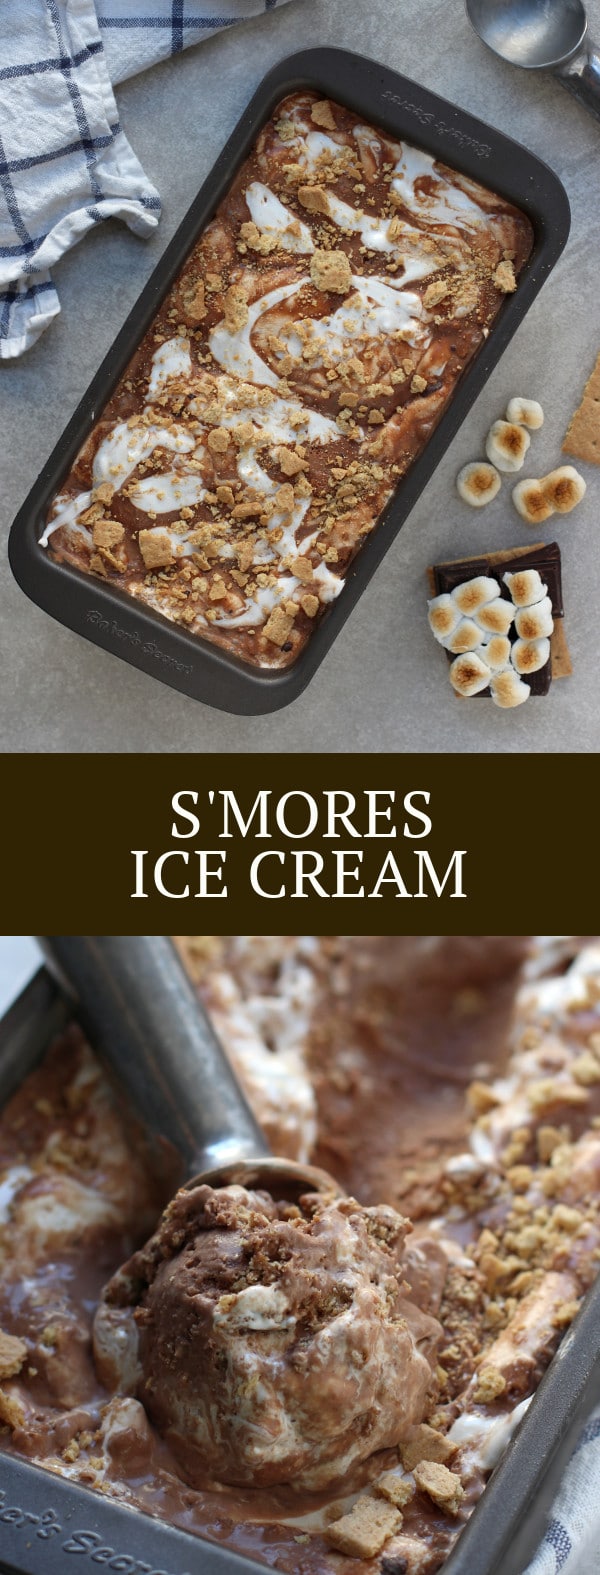 S'mores Ice Cream - Layers of chocolate, marshmallows and graham crackers in this delightful frozen sweet treat and dessert. Perfect for Summer! via @joyousapron